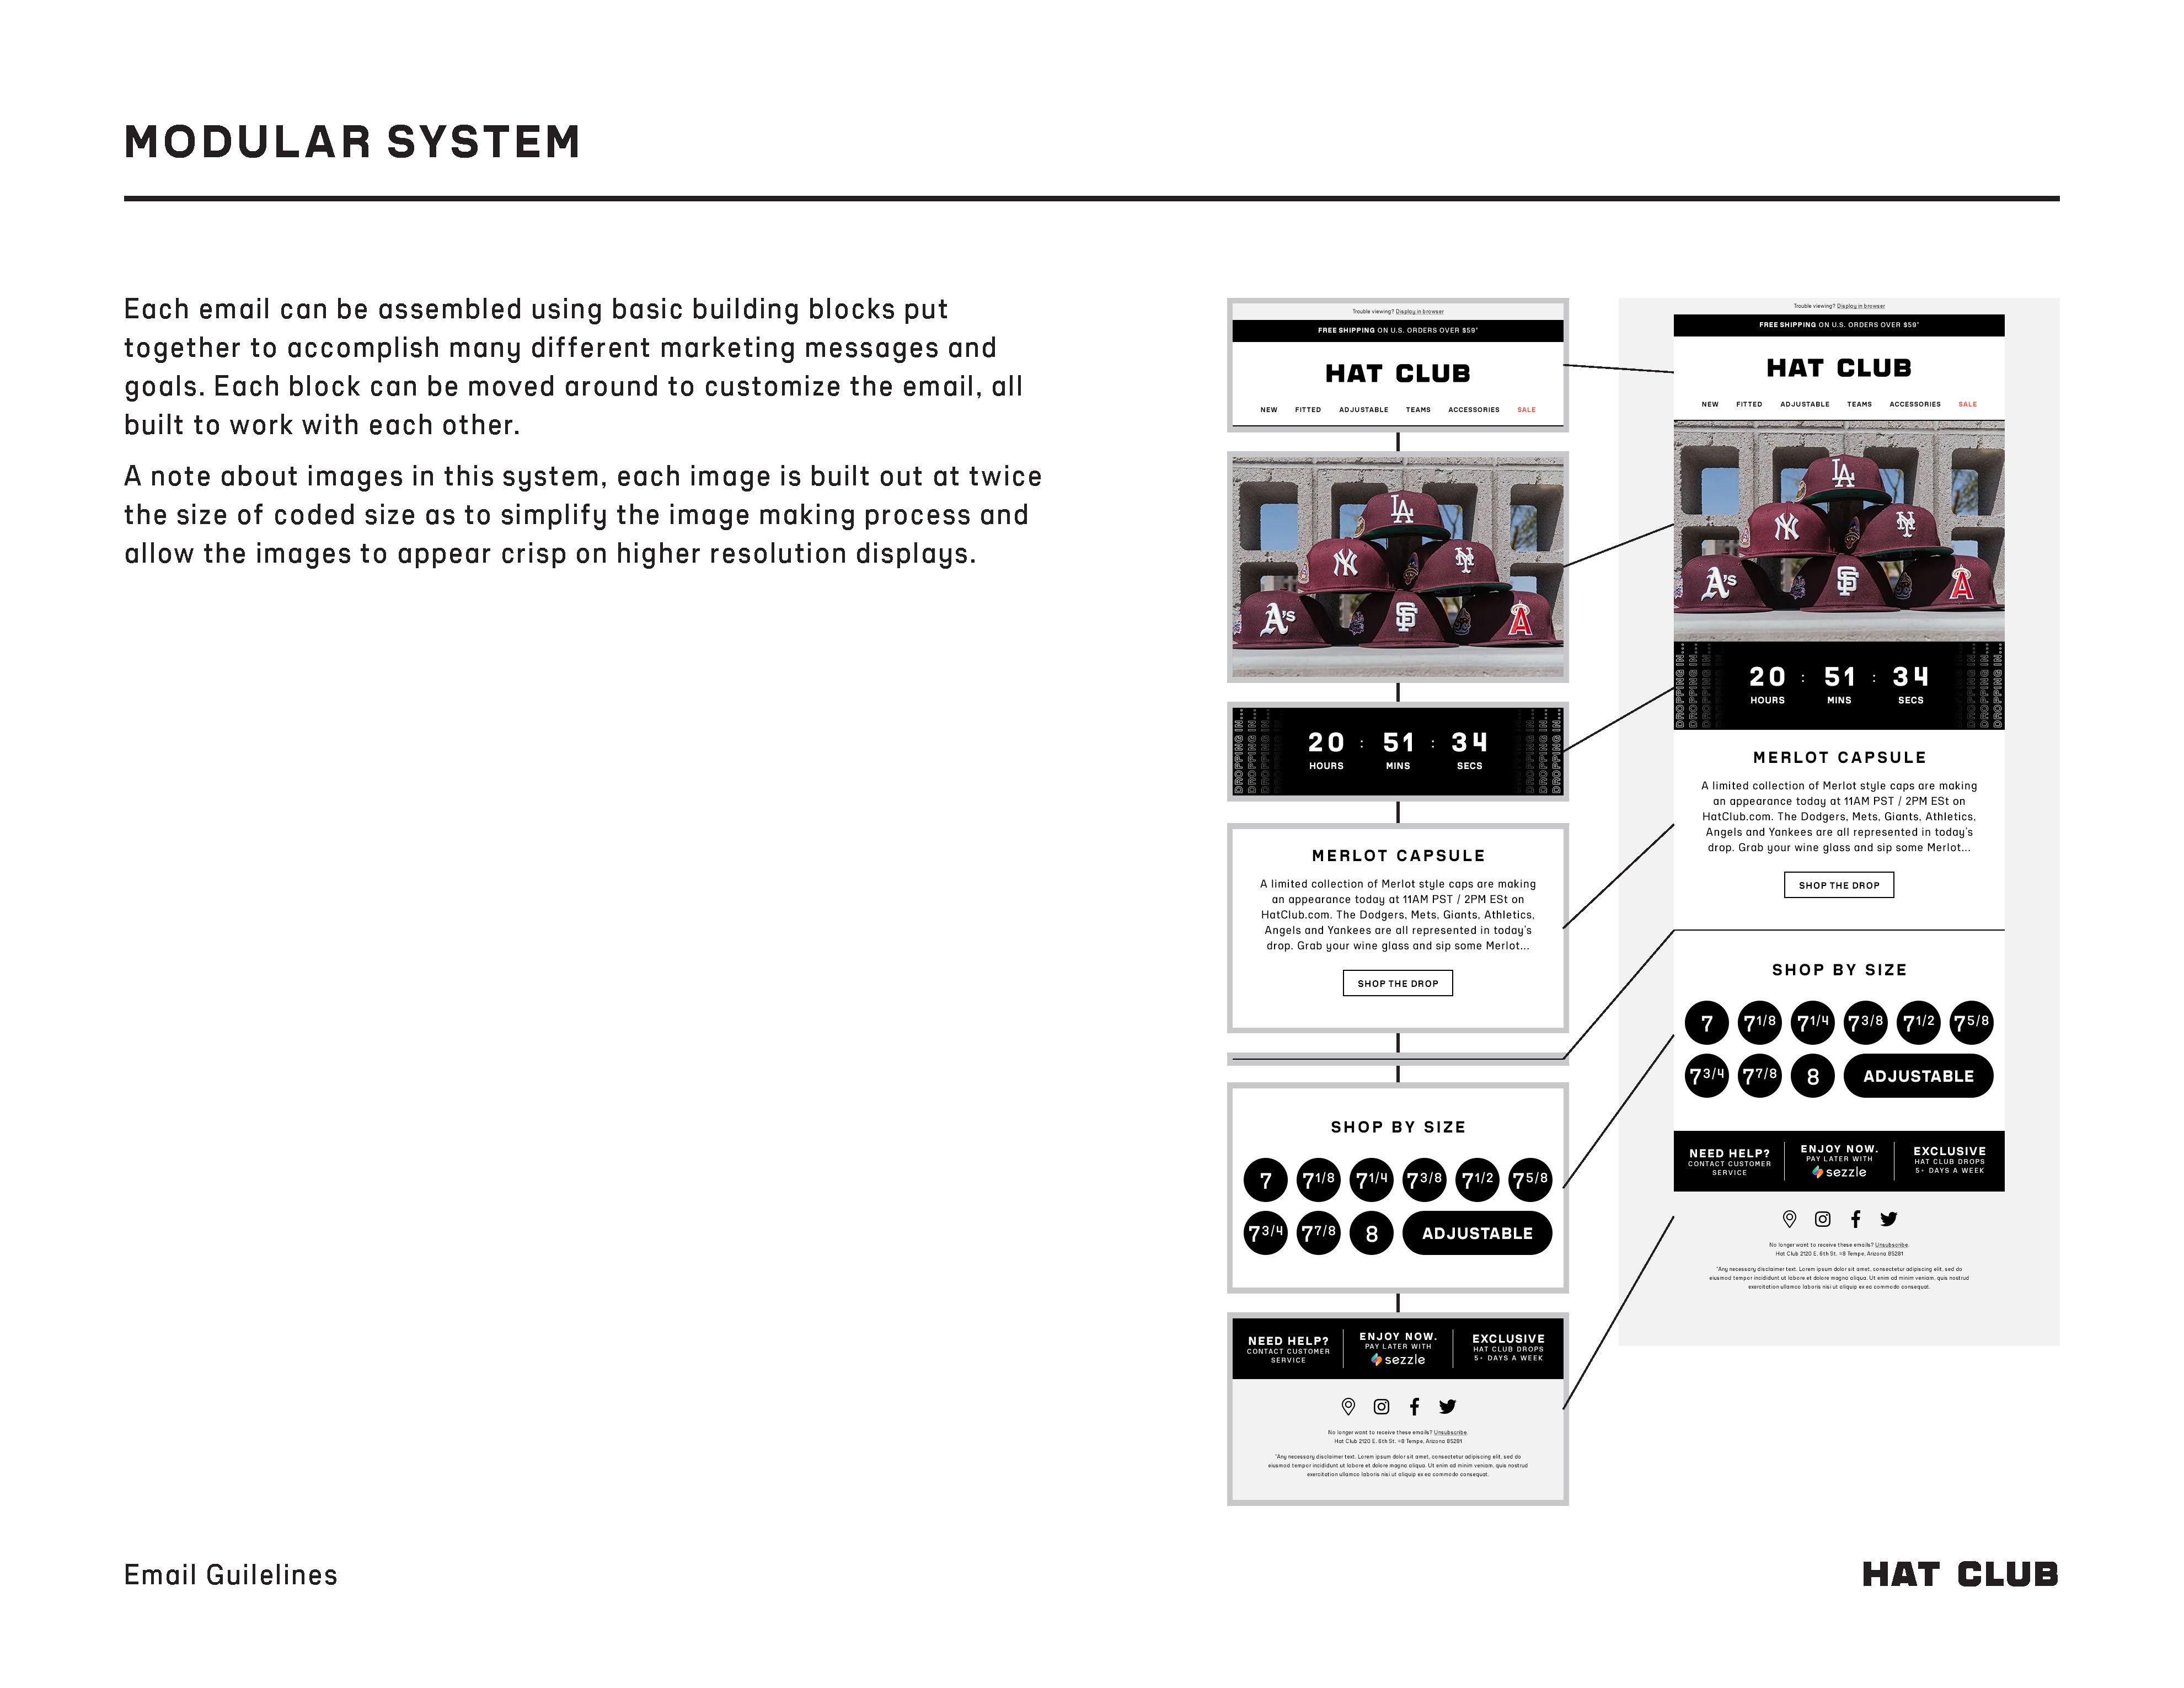 featured image four:Email Modular System Design